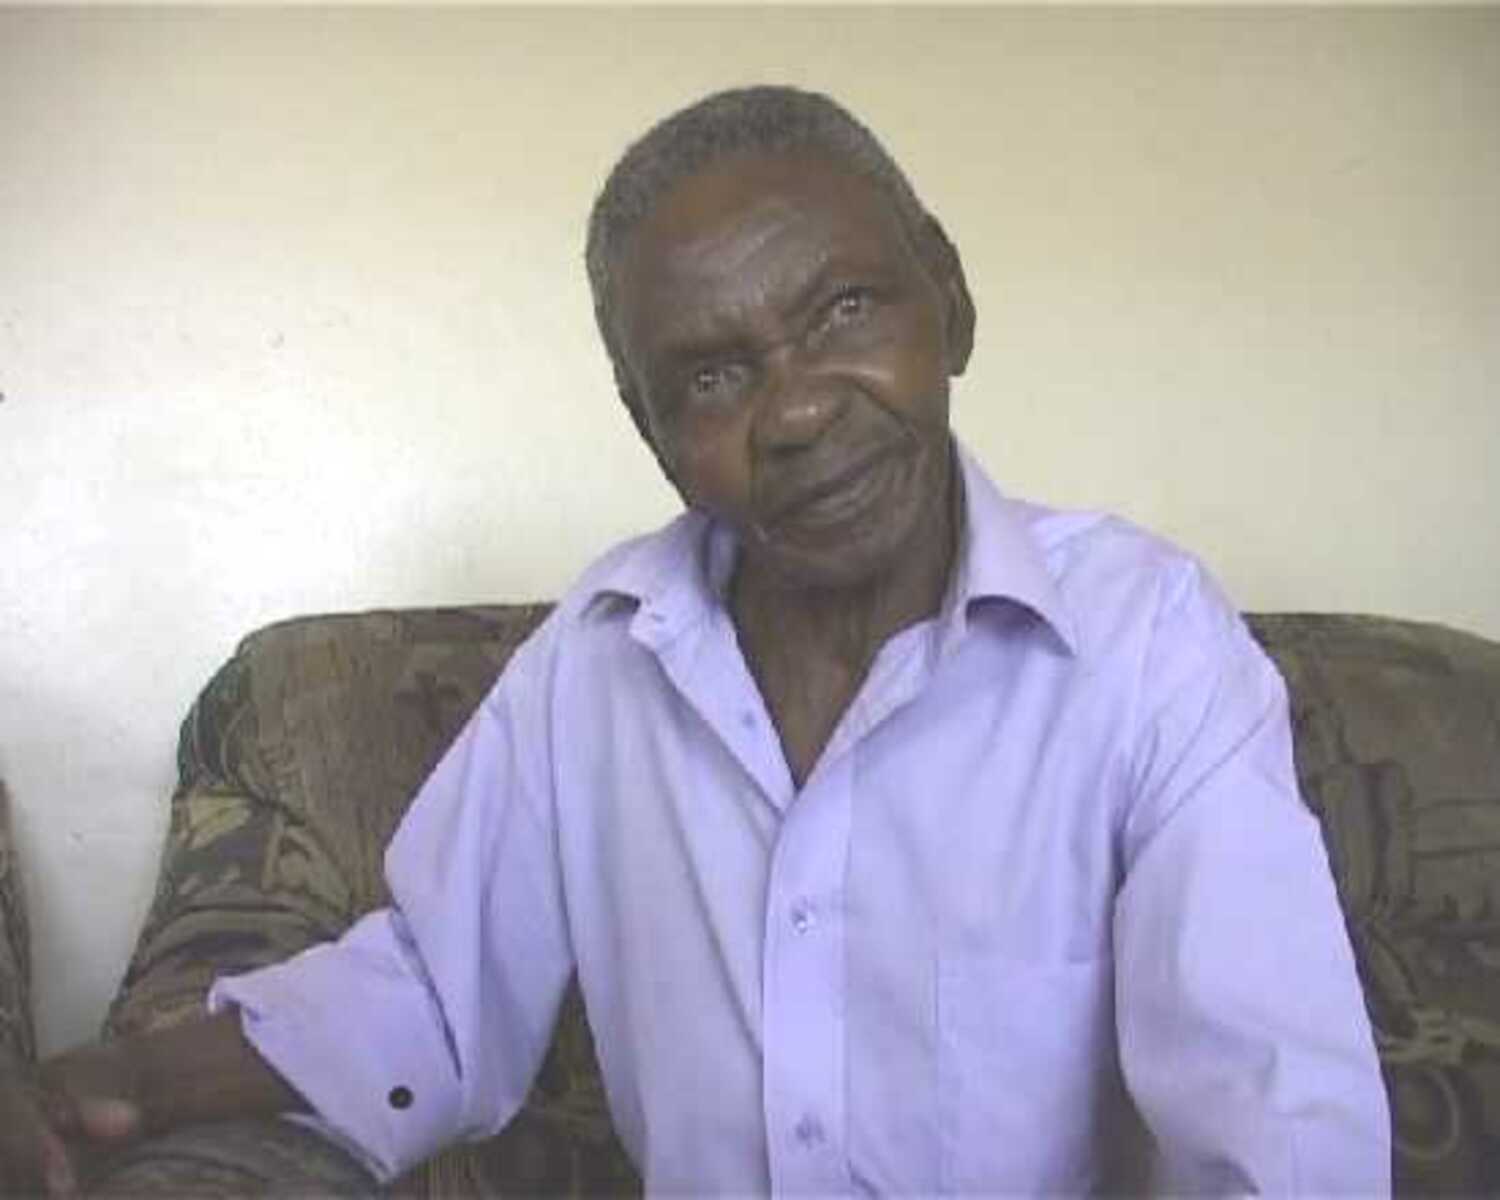 Daniel Masemola, a widowed pensioner from Sebokeng, during an oral history interview with Dale McKinley and Ahmed Veriava.